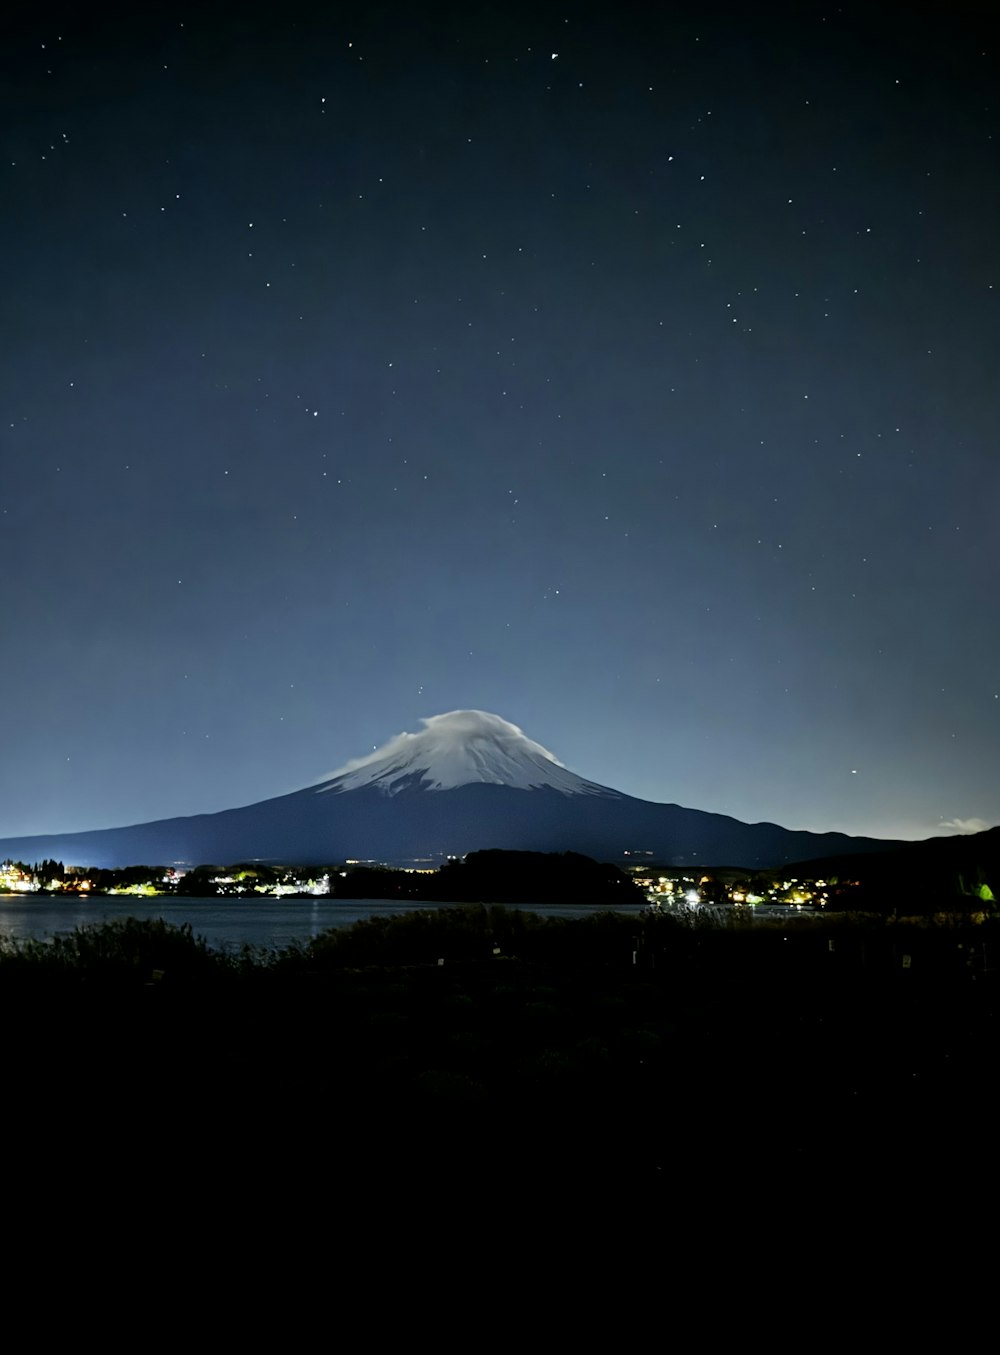 a night view of a mountain with a lake in the foreground